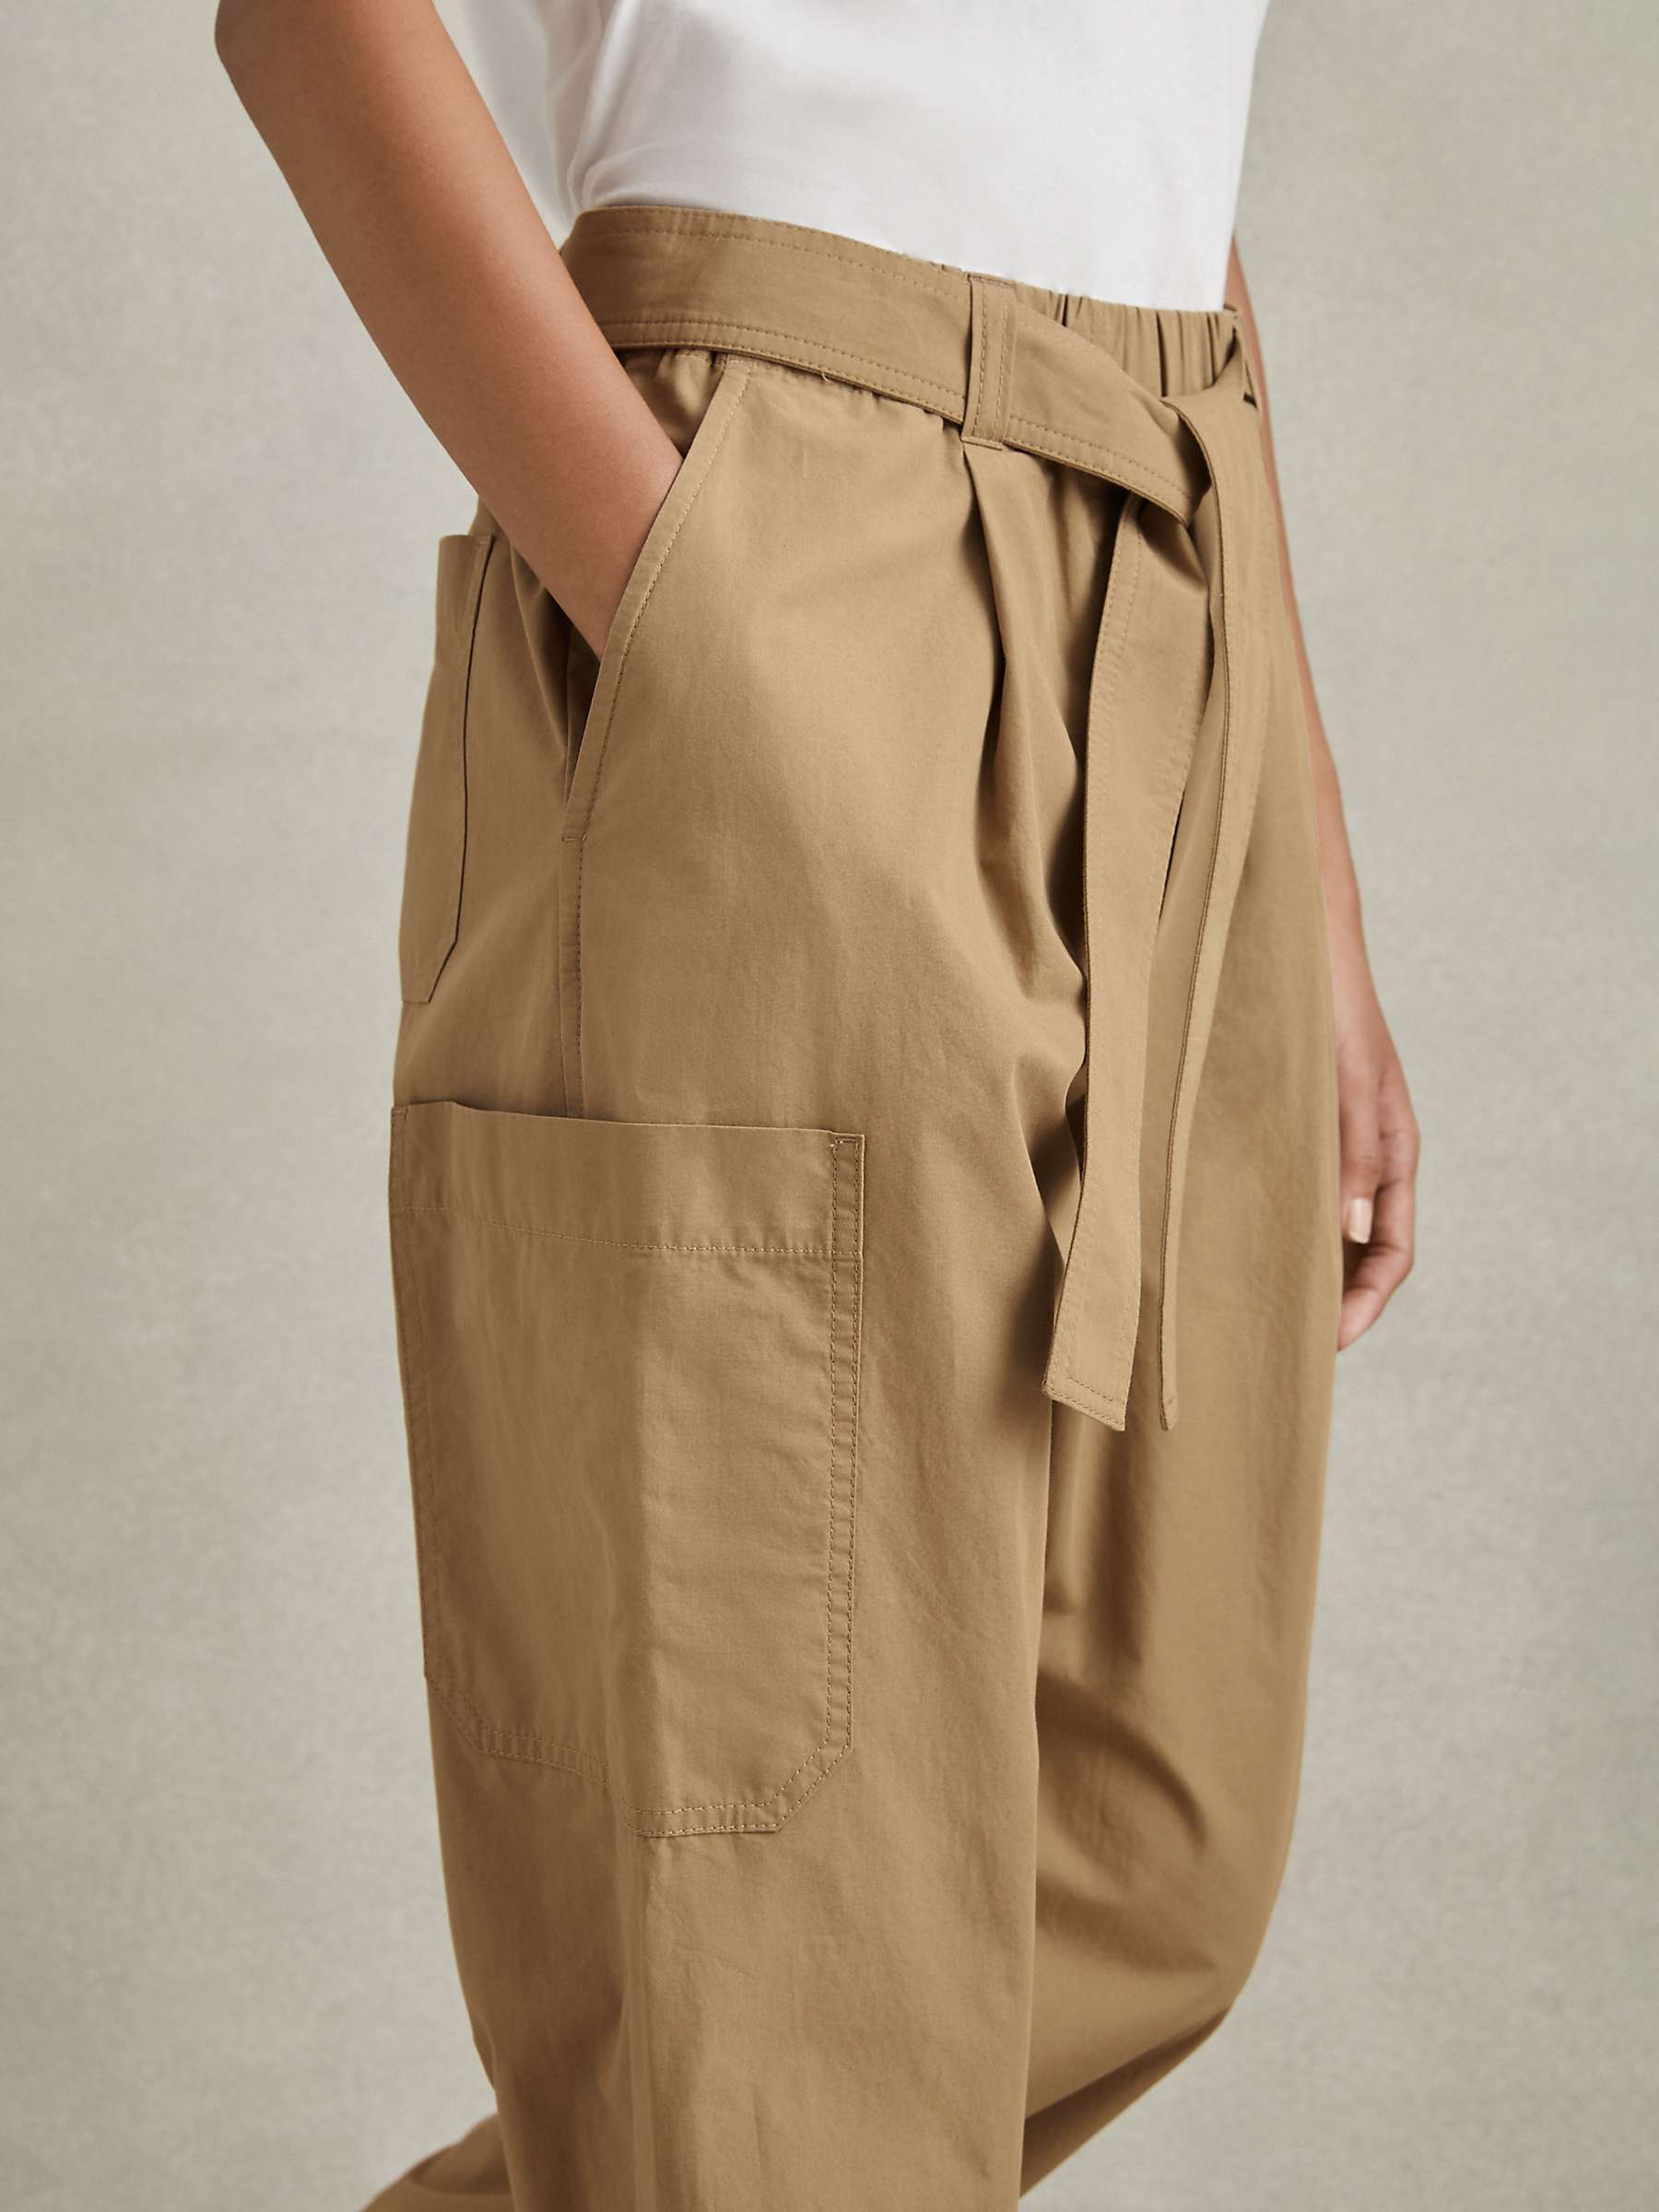 Buy Reiss Delia Tapered Parachute Cargo Trousers Online at johnlewis.com